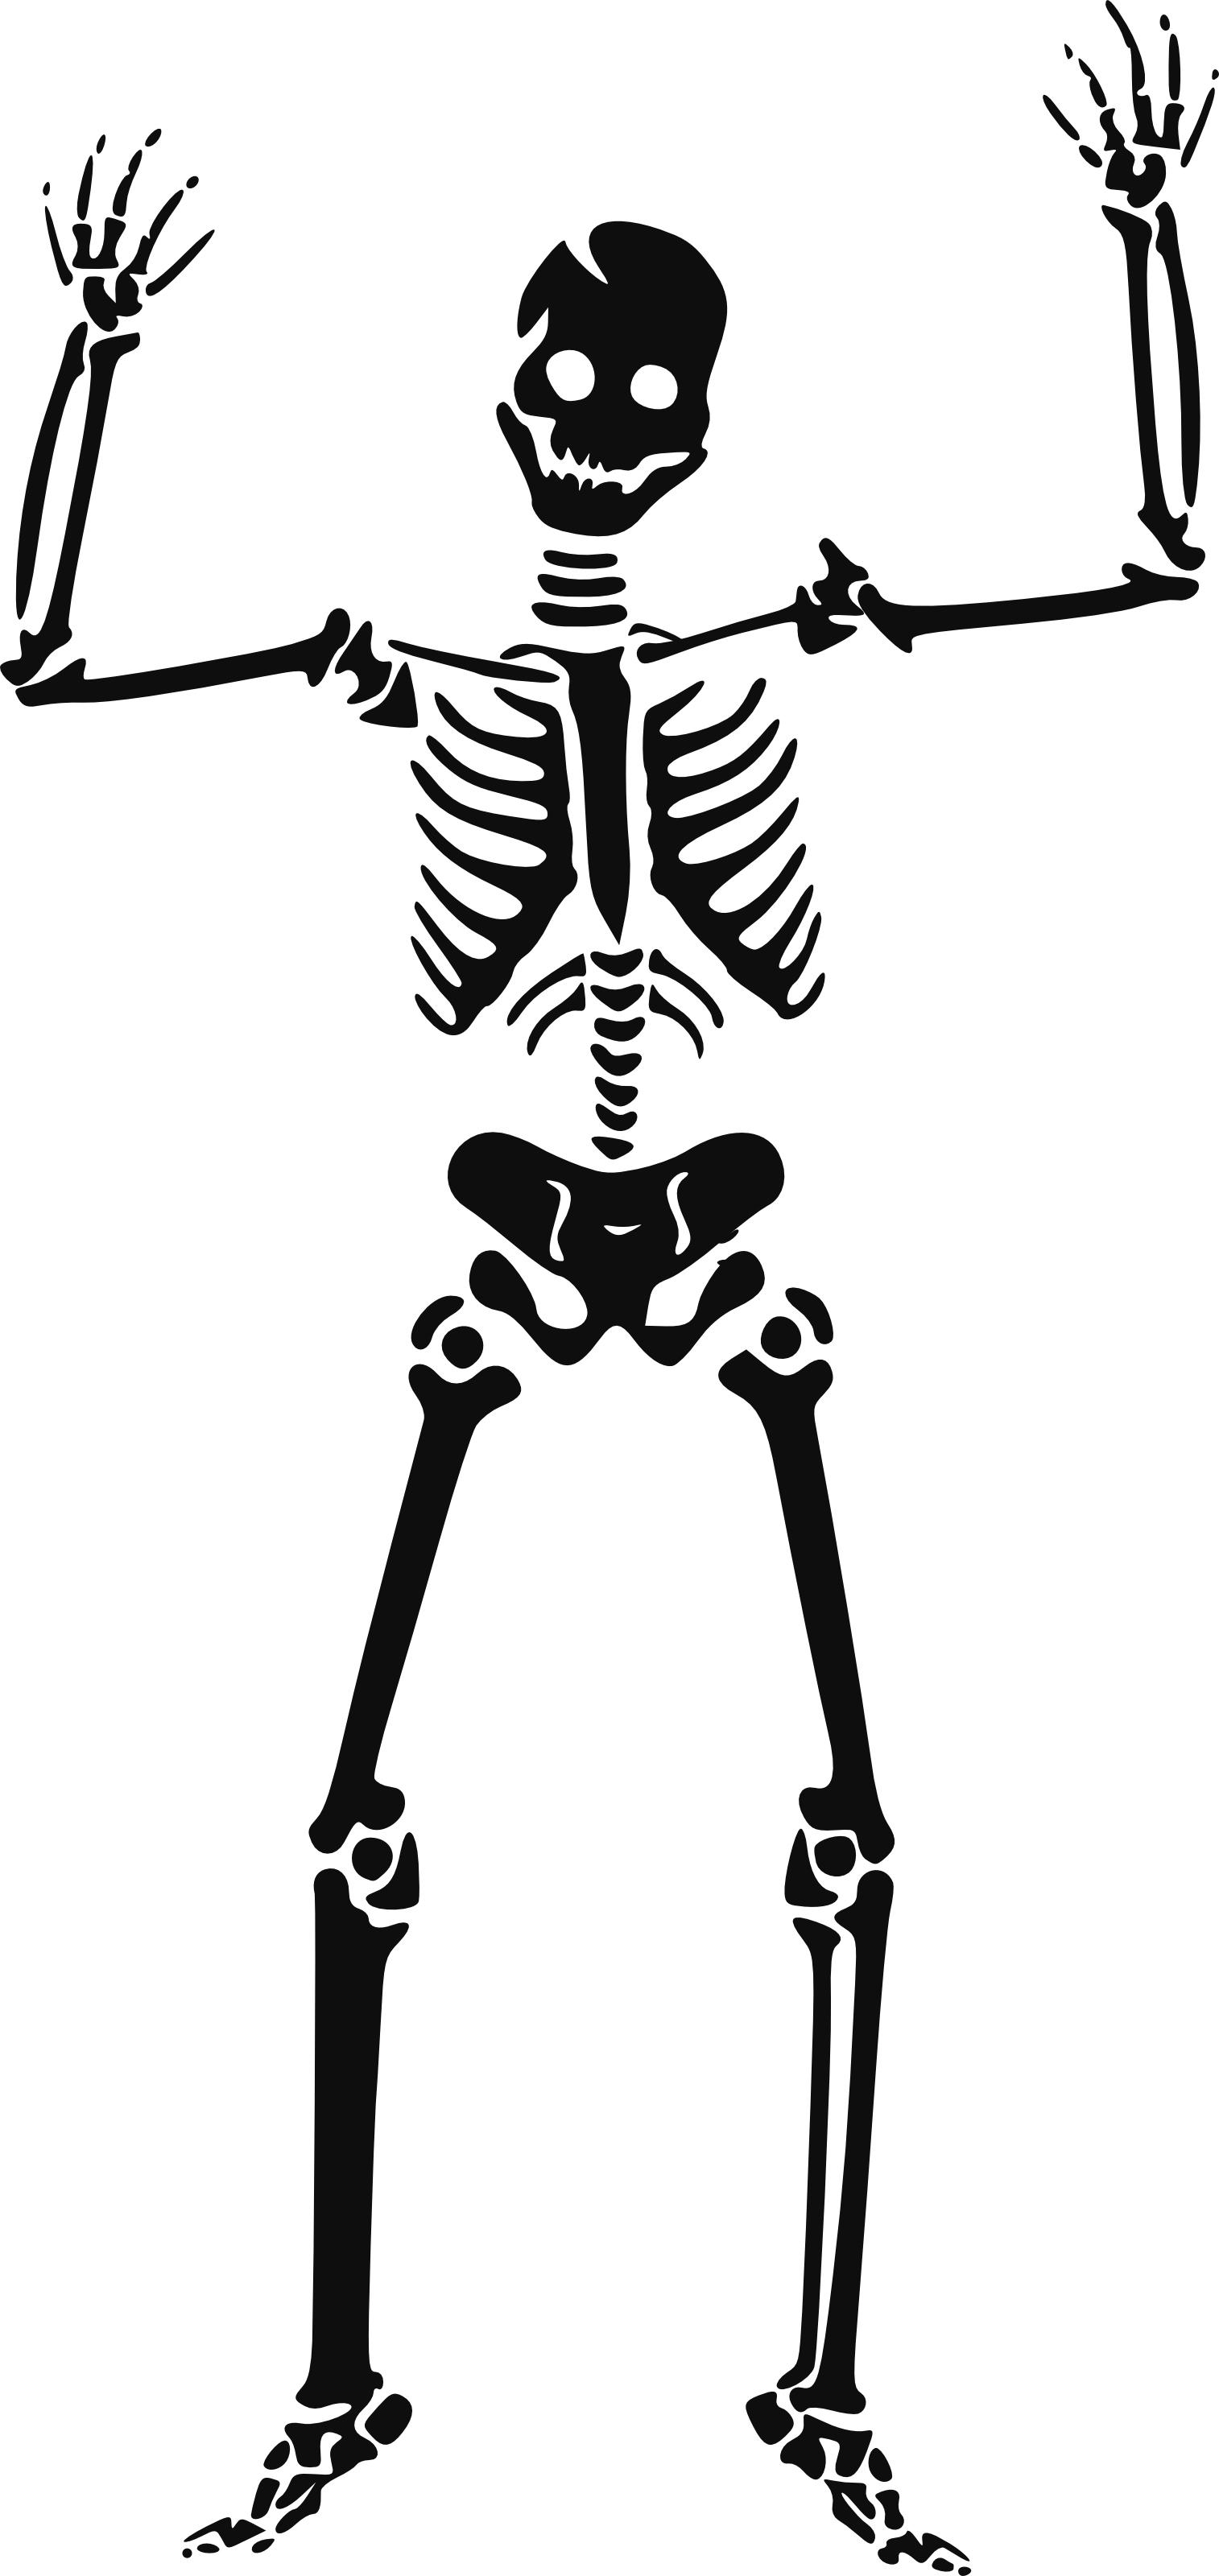 Halloween skeleton clipart free clipart images image